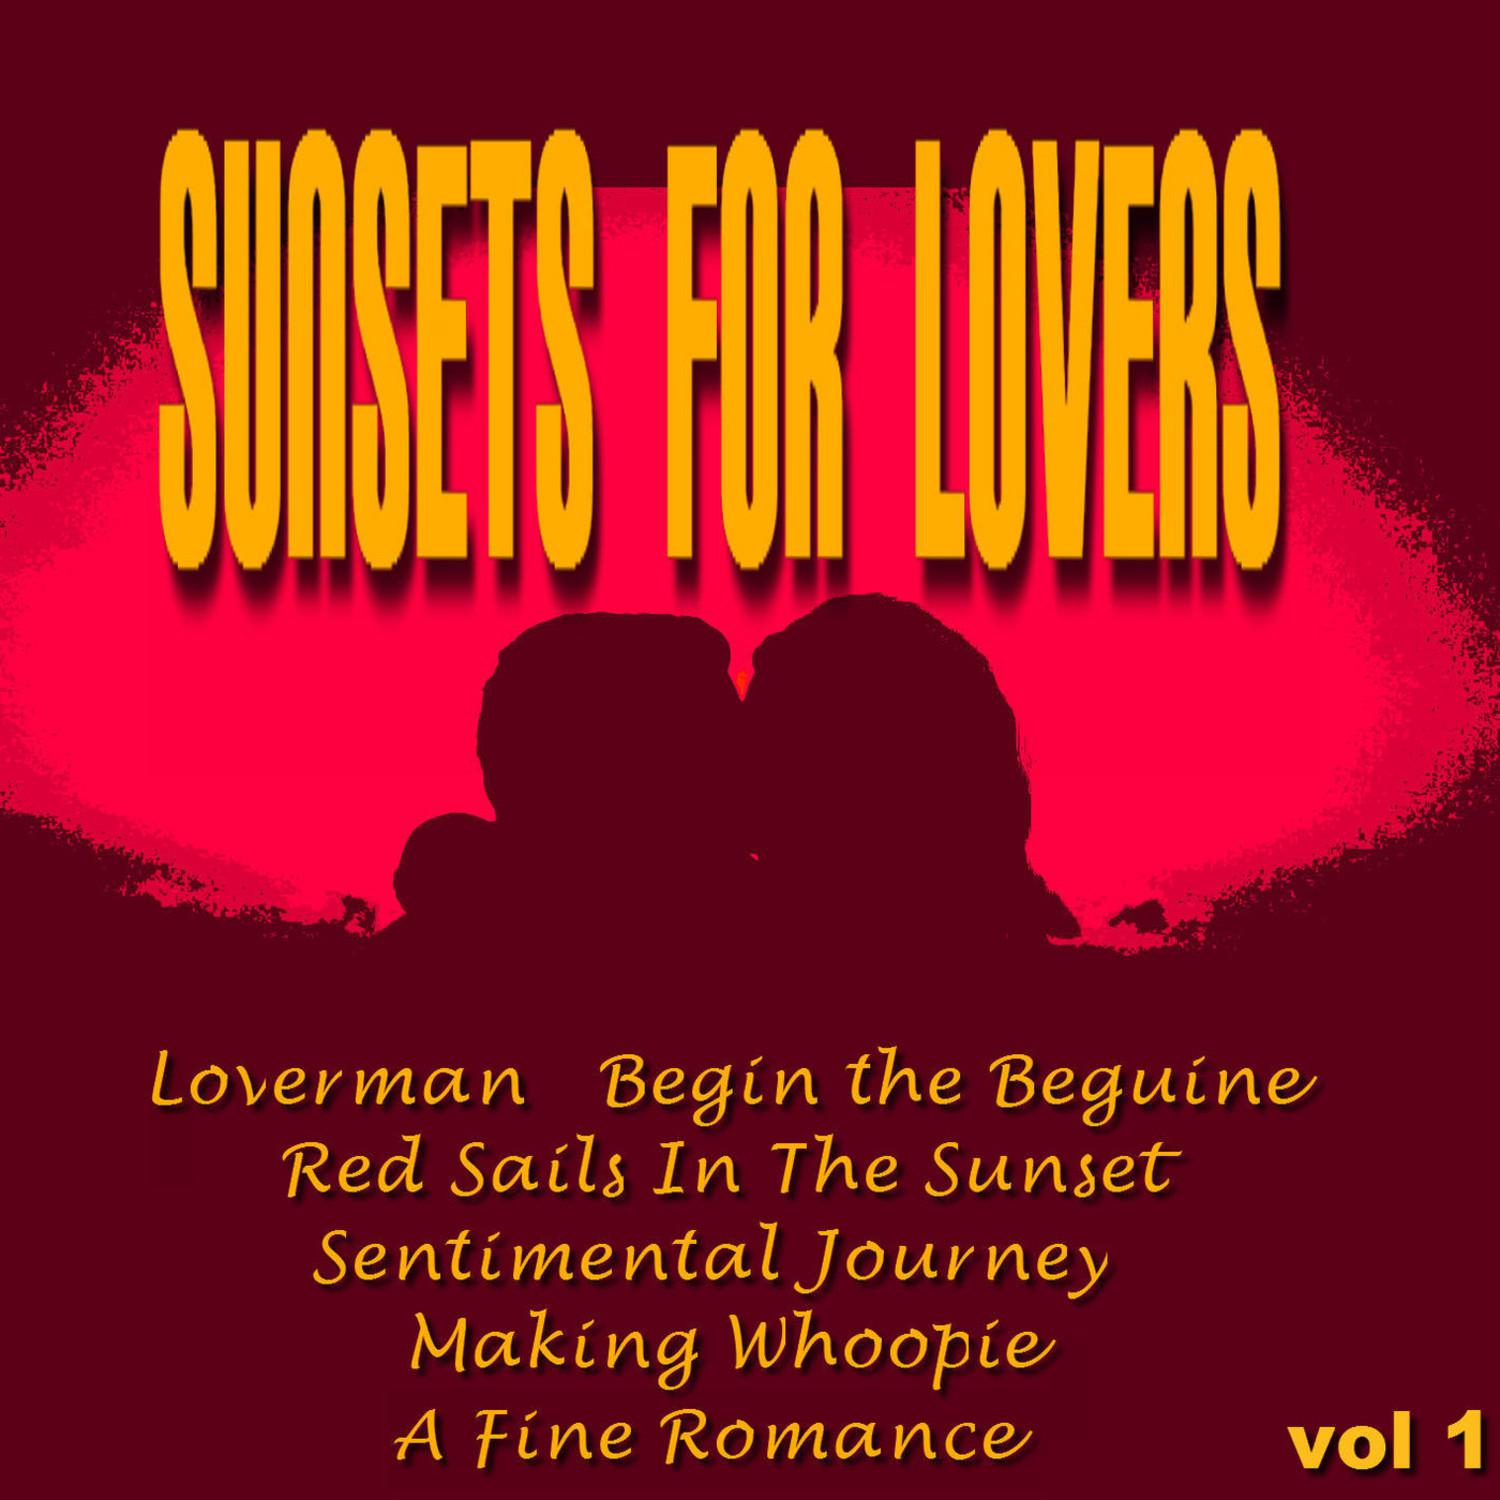 Sunsets for Lovers Vol. 1